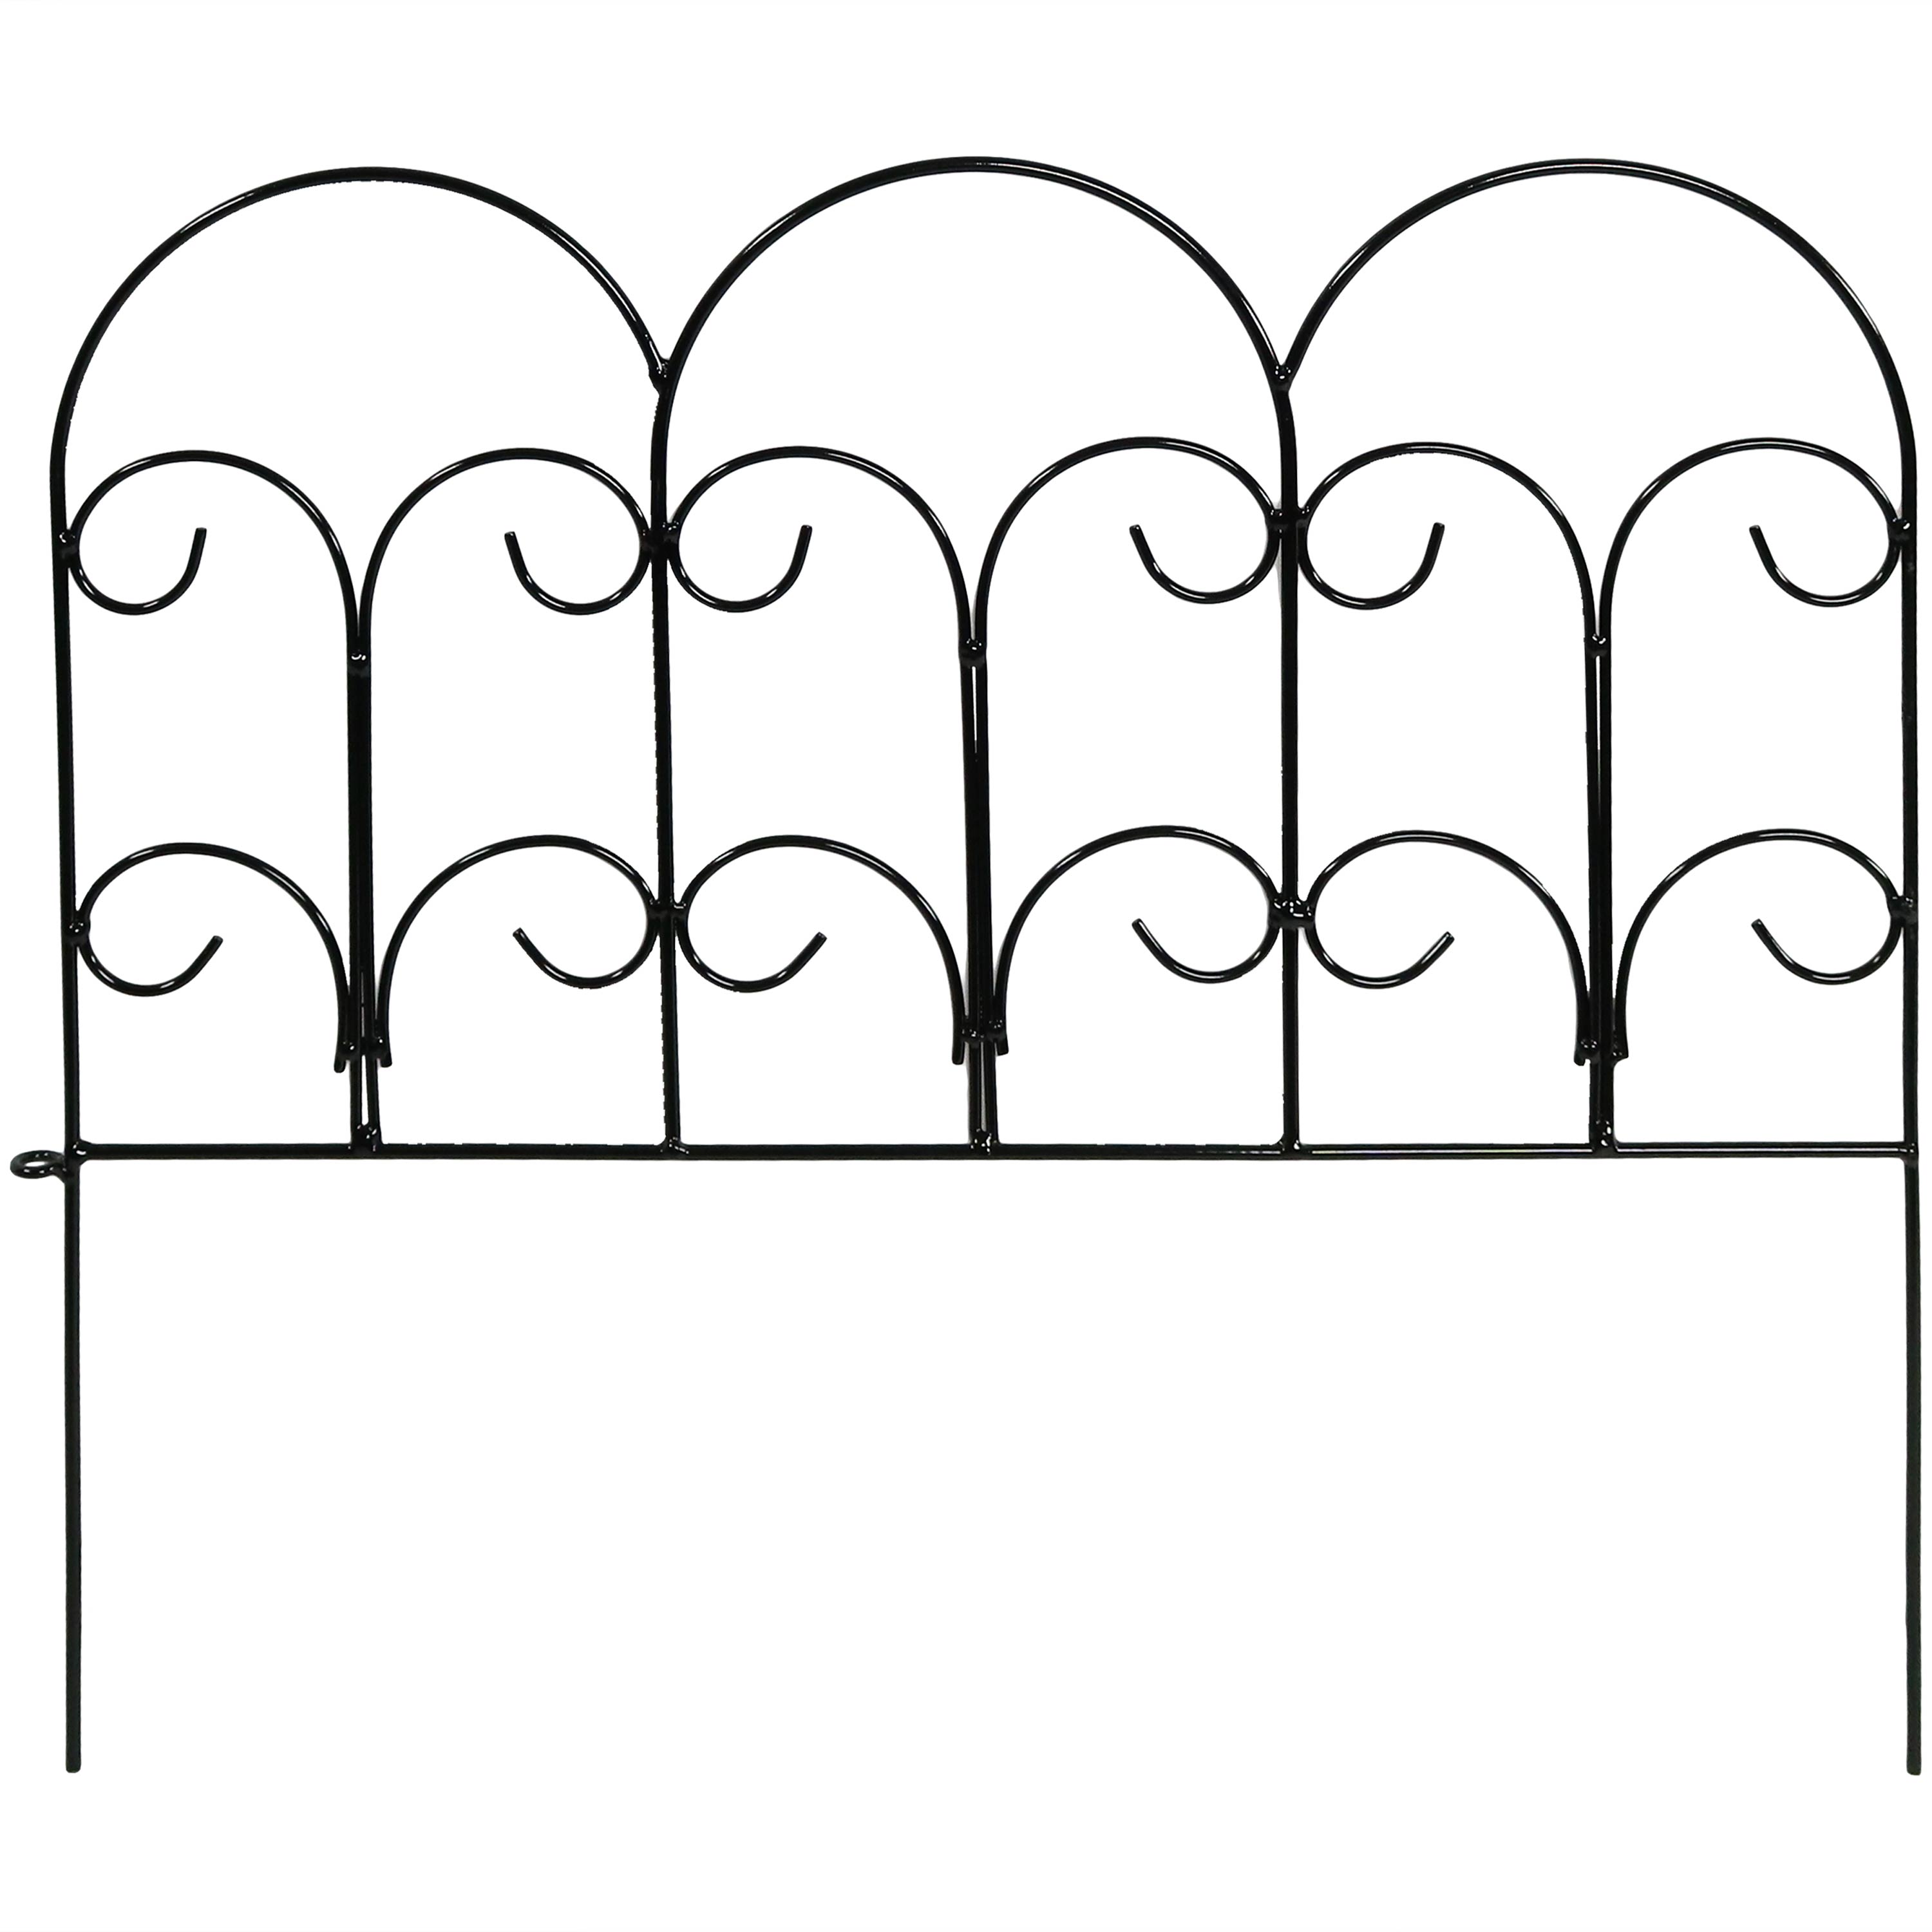 Black 26-Inch Wide x 32-Inch Tall Each Sunnydaze 5-Piece Modern Leaves and Vines Decorative Metal Garden Fence Panel Set Steel Border Garden and Landscape Fencing 10-Foot Overall Length 